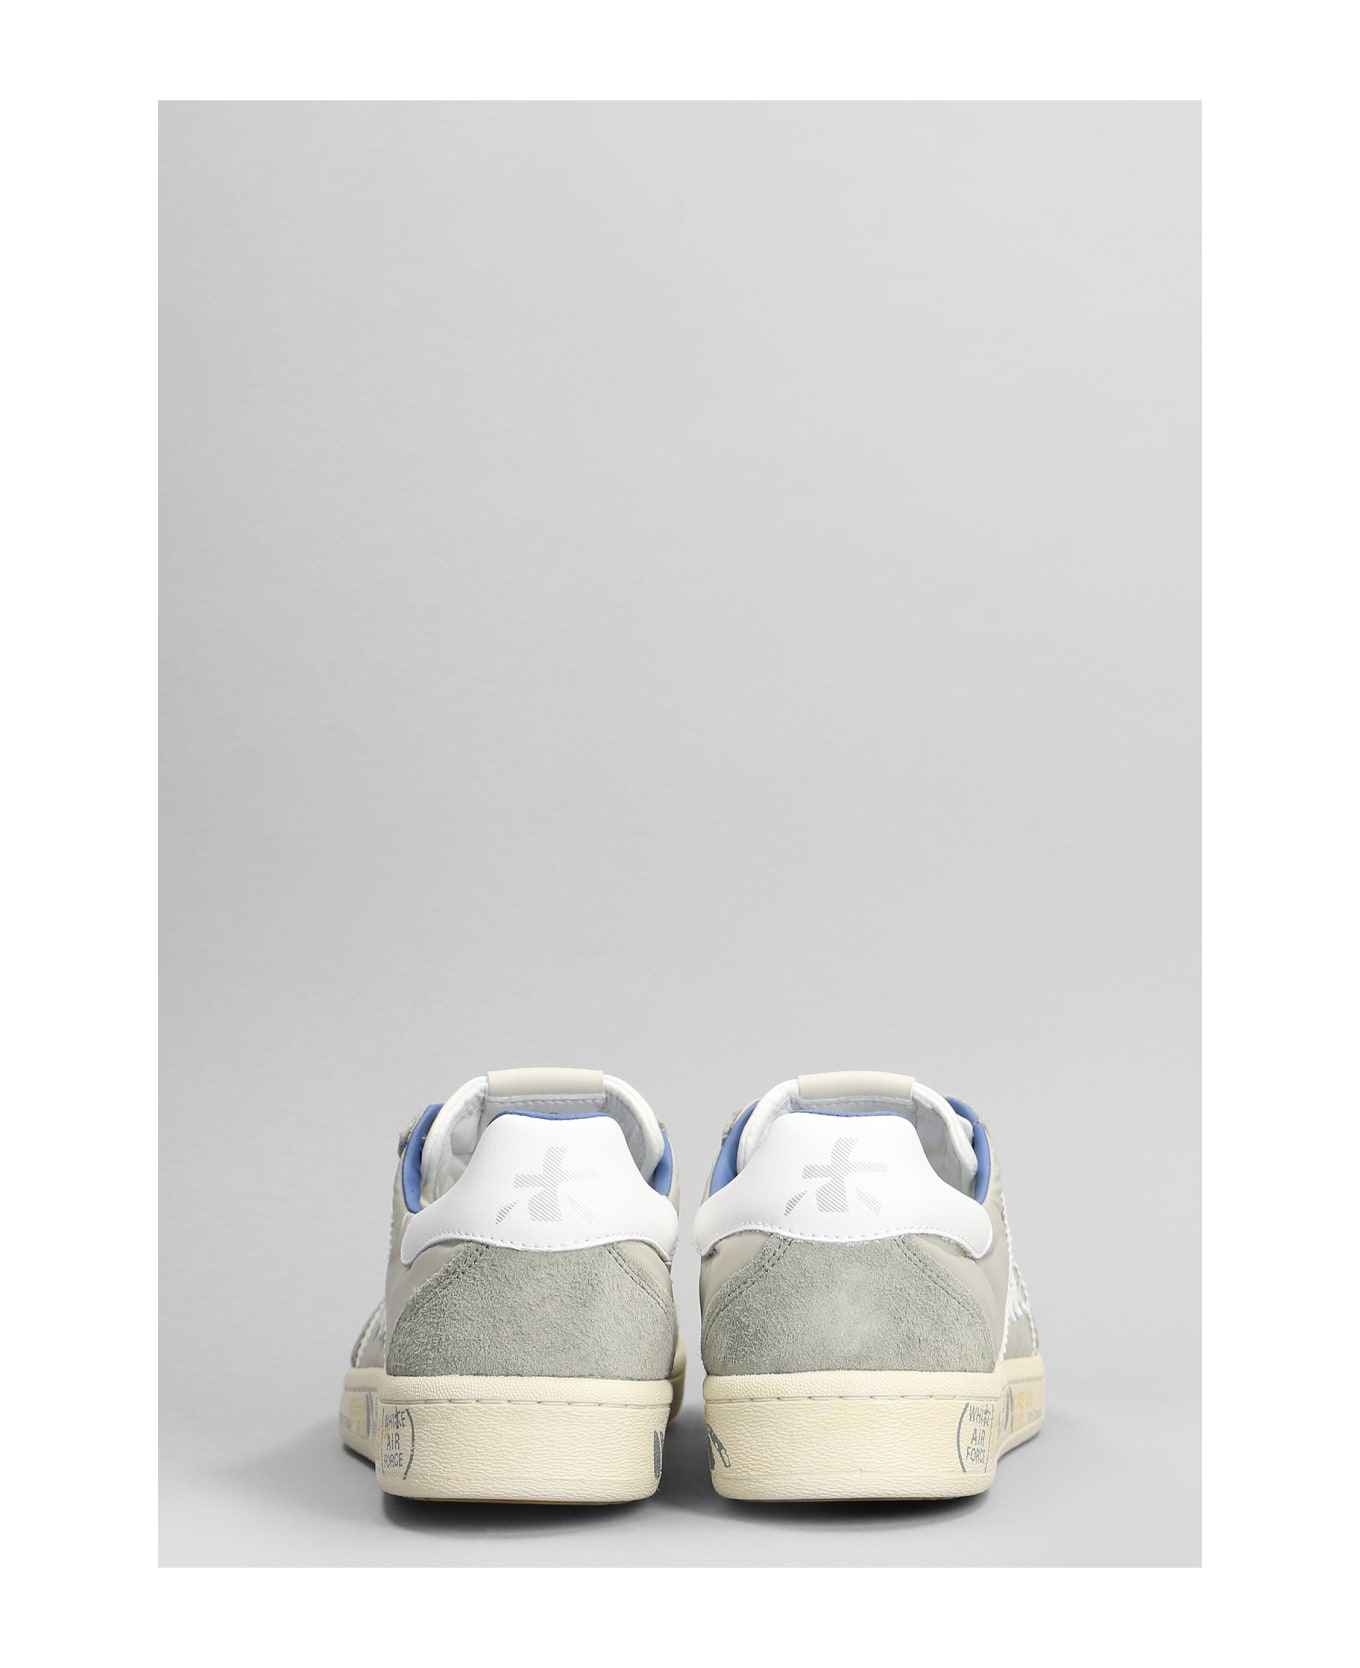 Premiata Bonnie Sneakers In Grey Suede And Fabric - grey